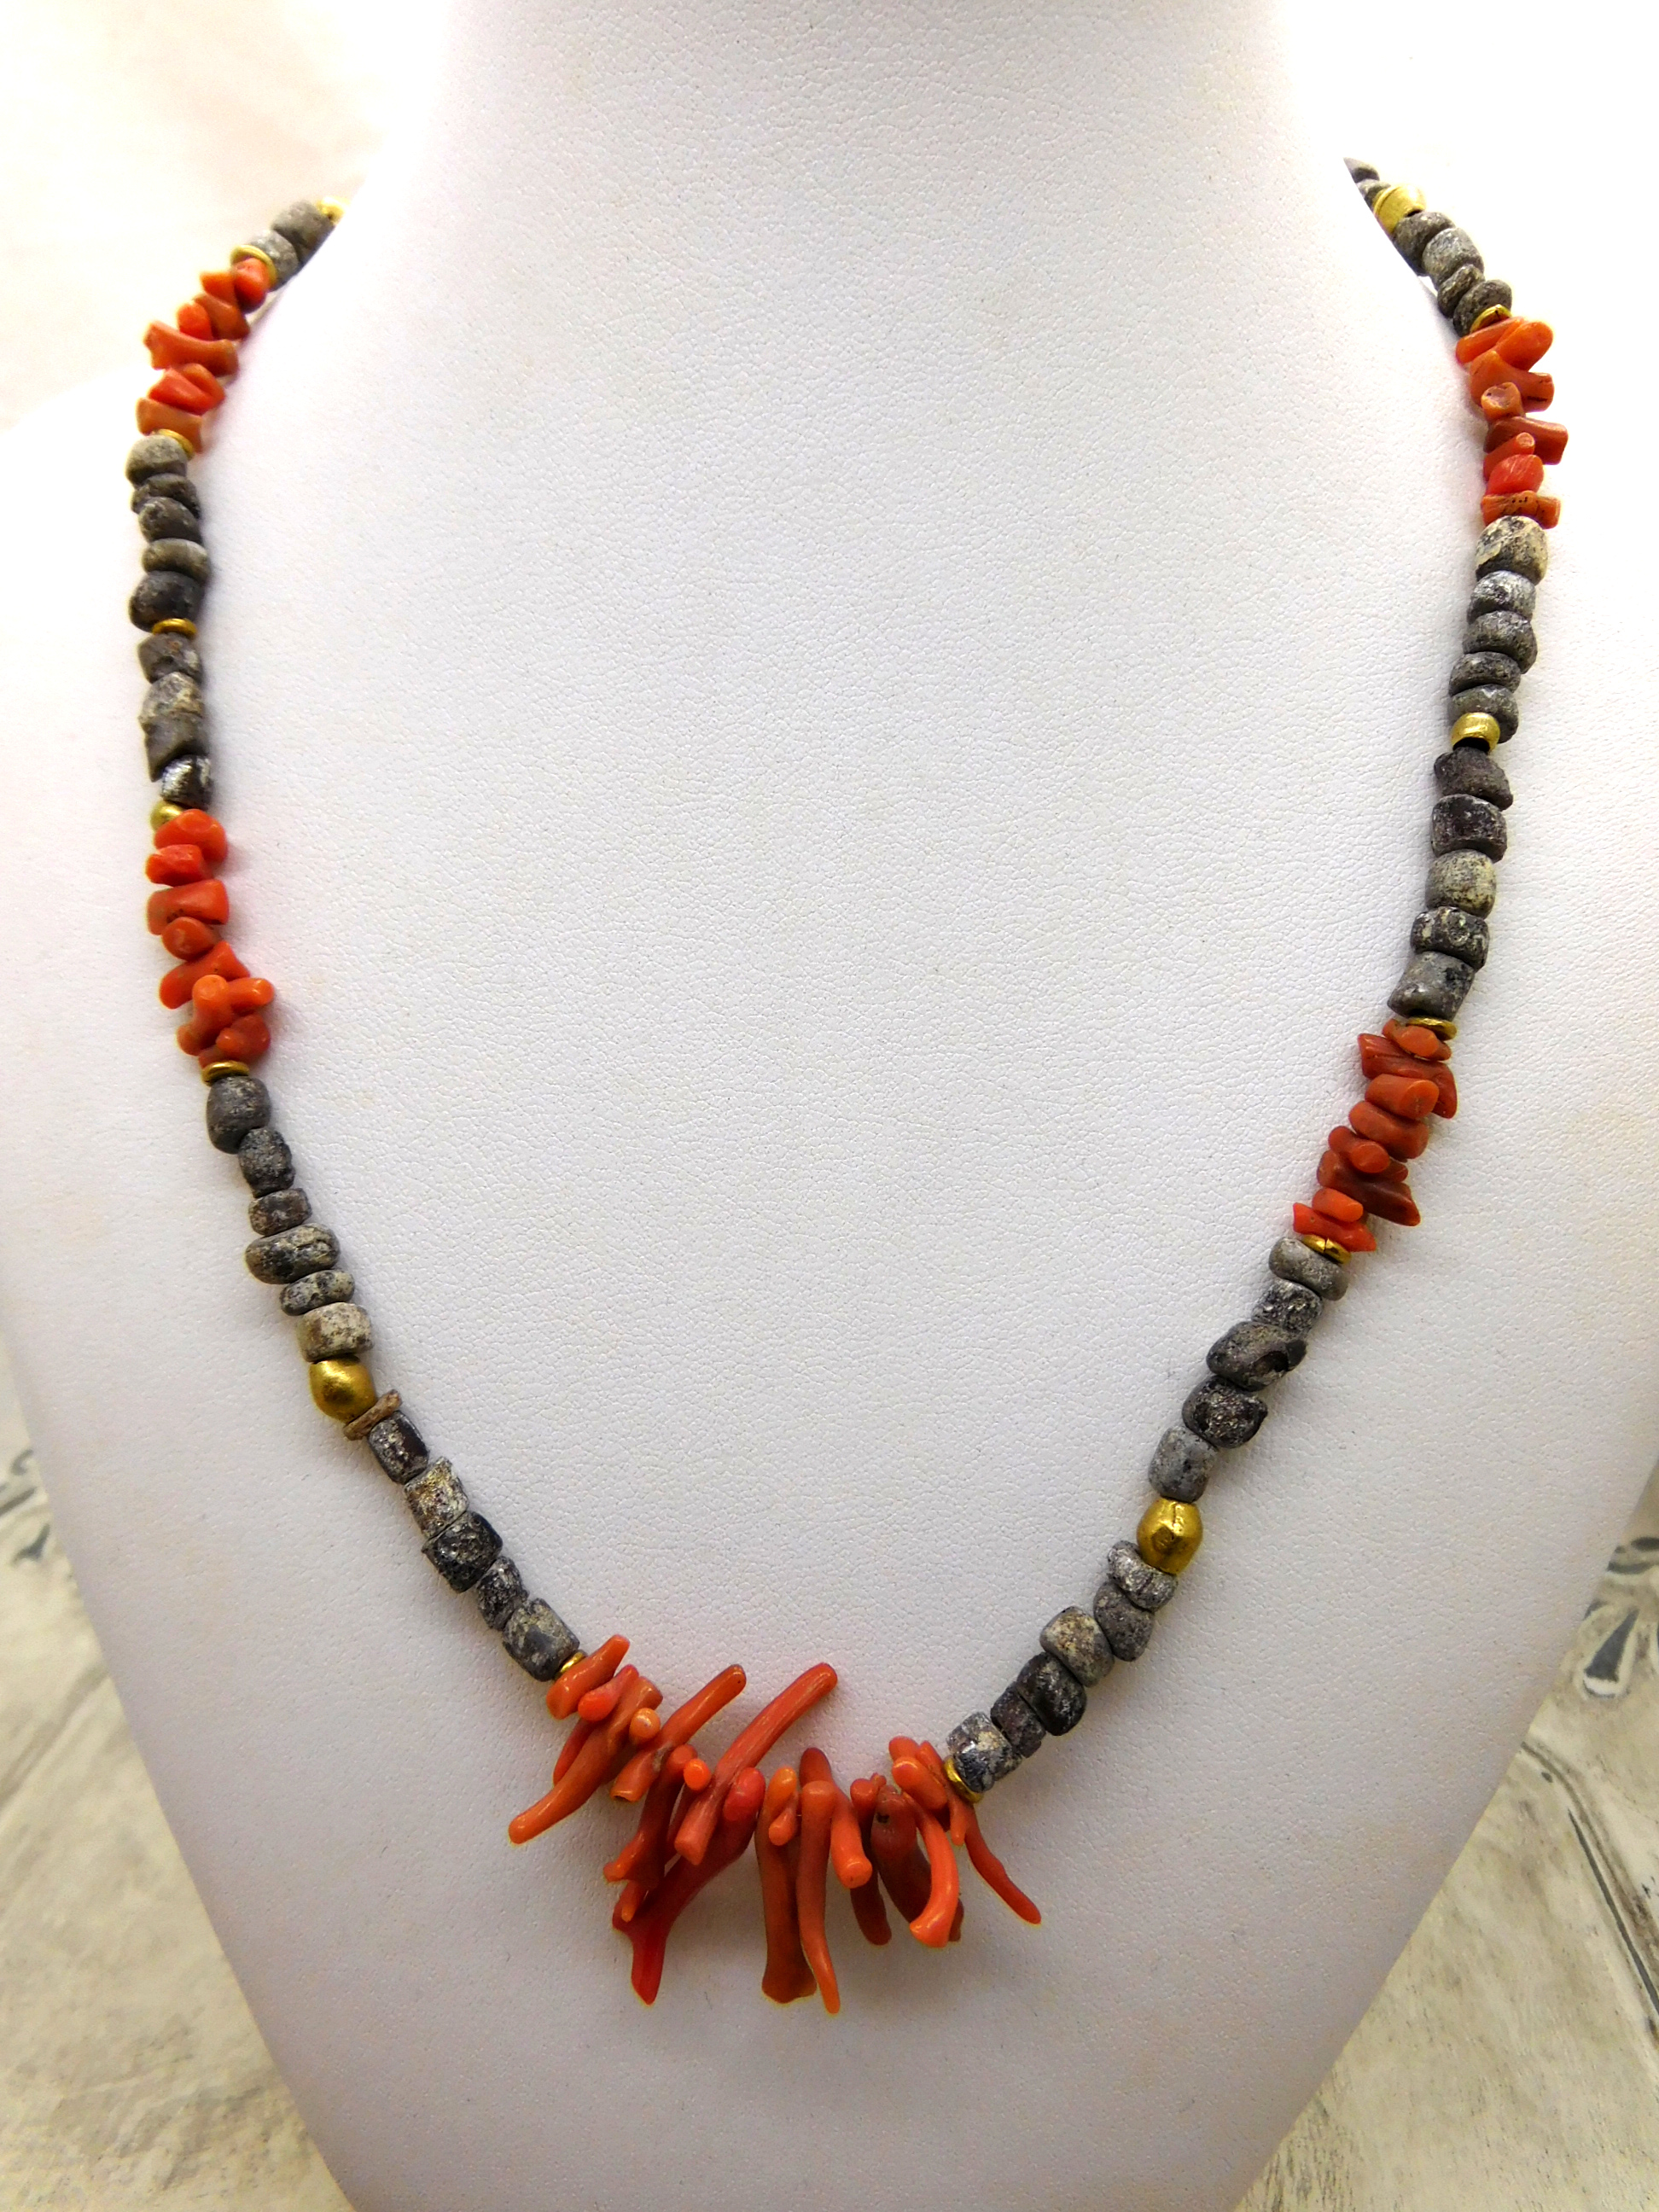 Necklace with antique digbeads from Mali and branch coral from Nigeria